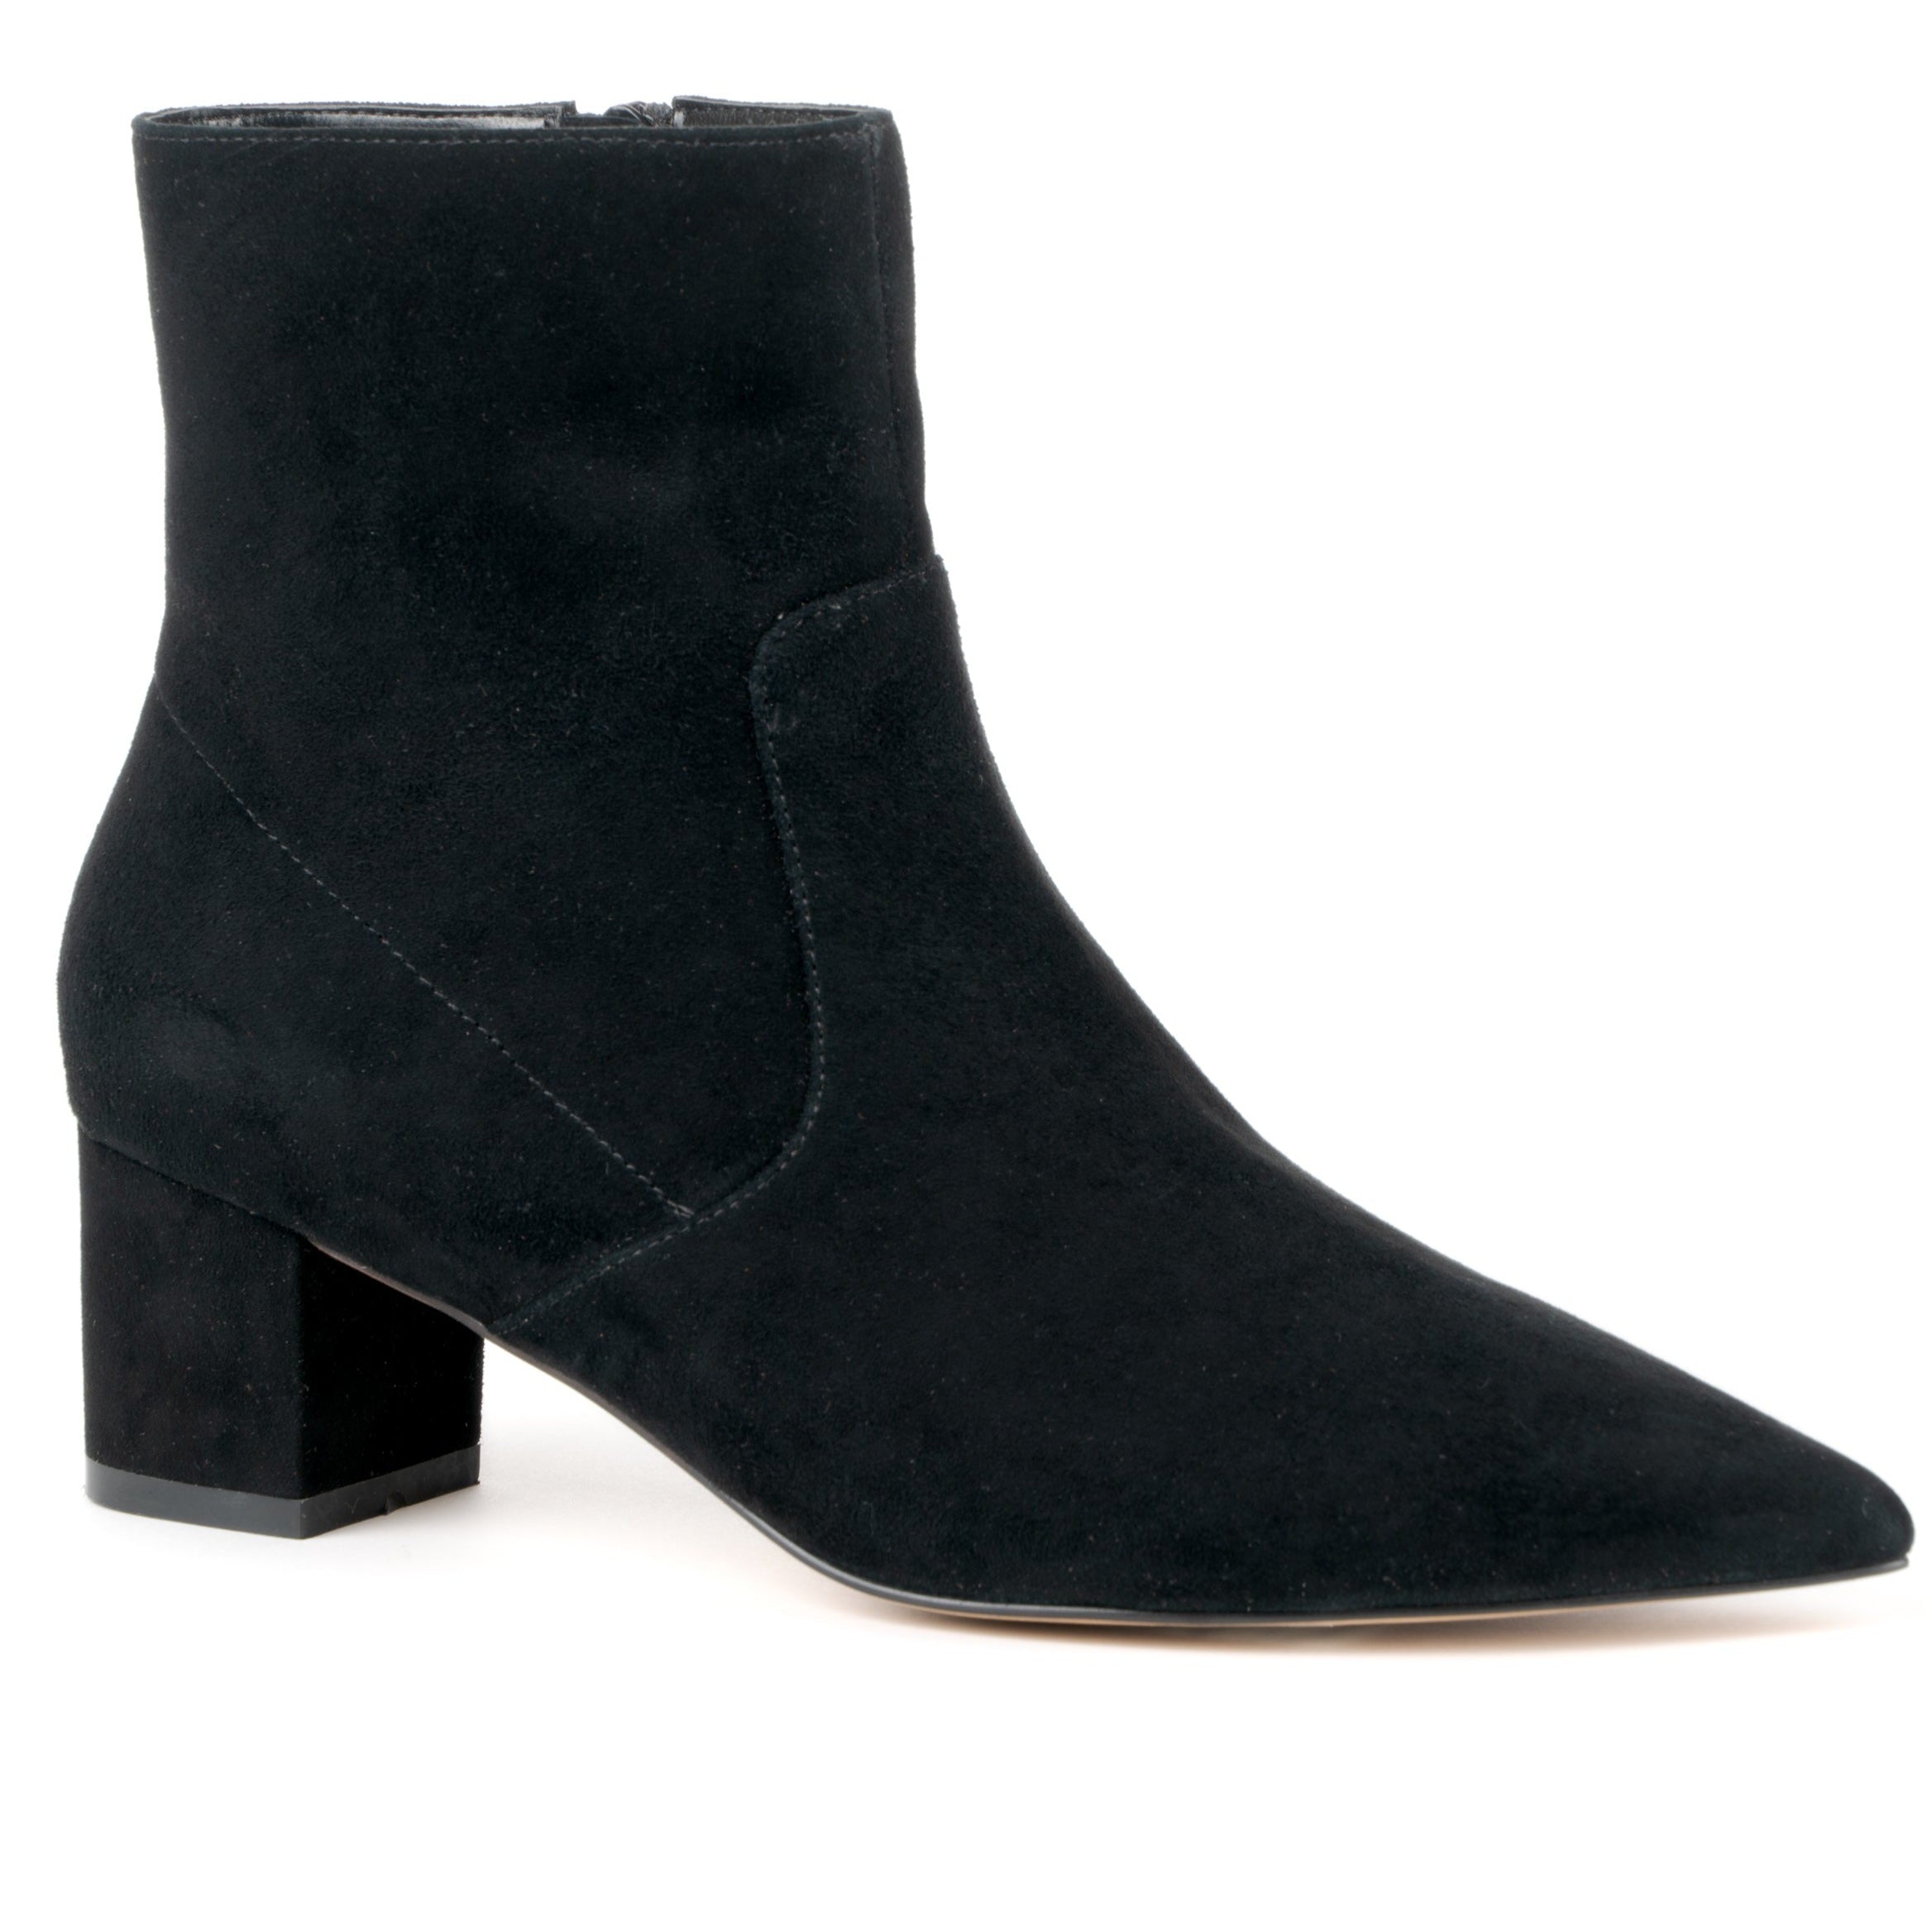 Black women heel boots with pointed toe - corner view 